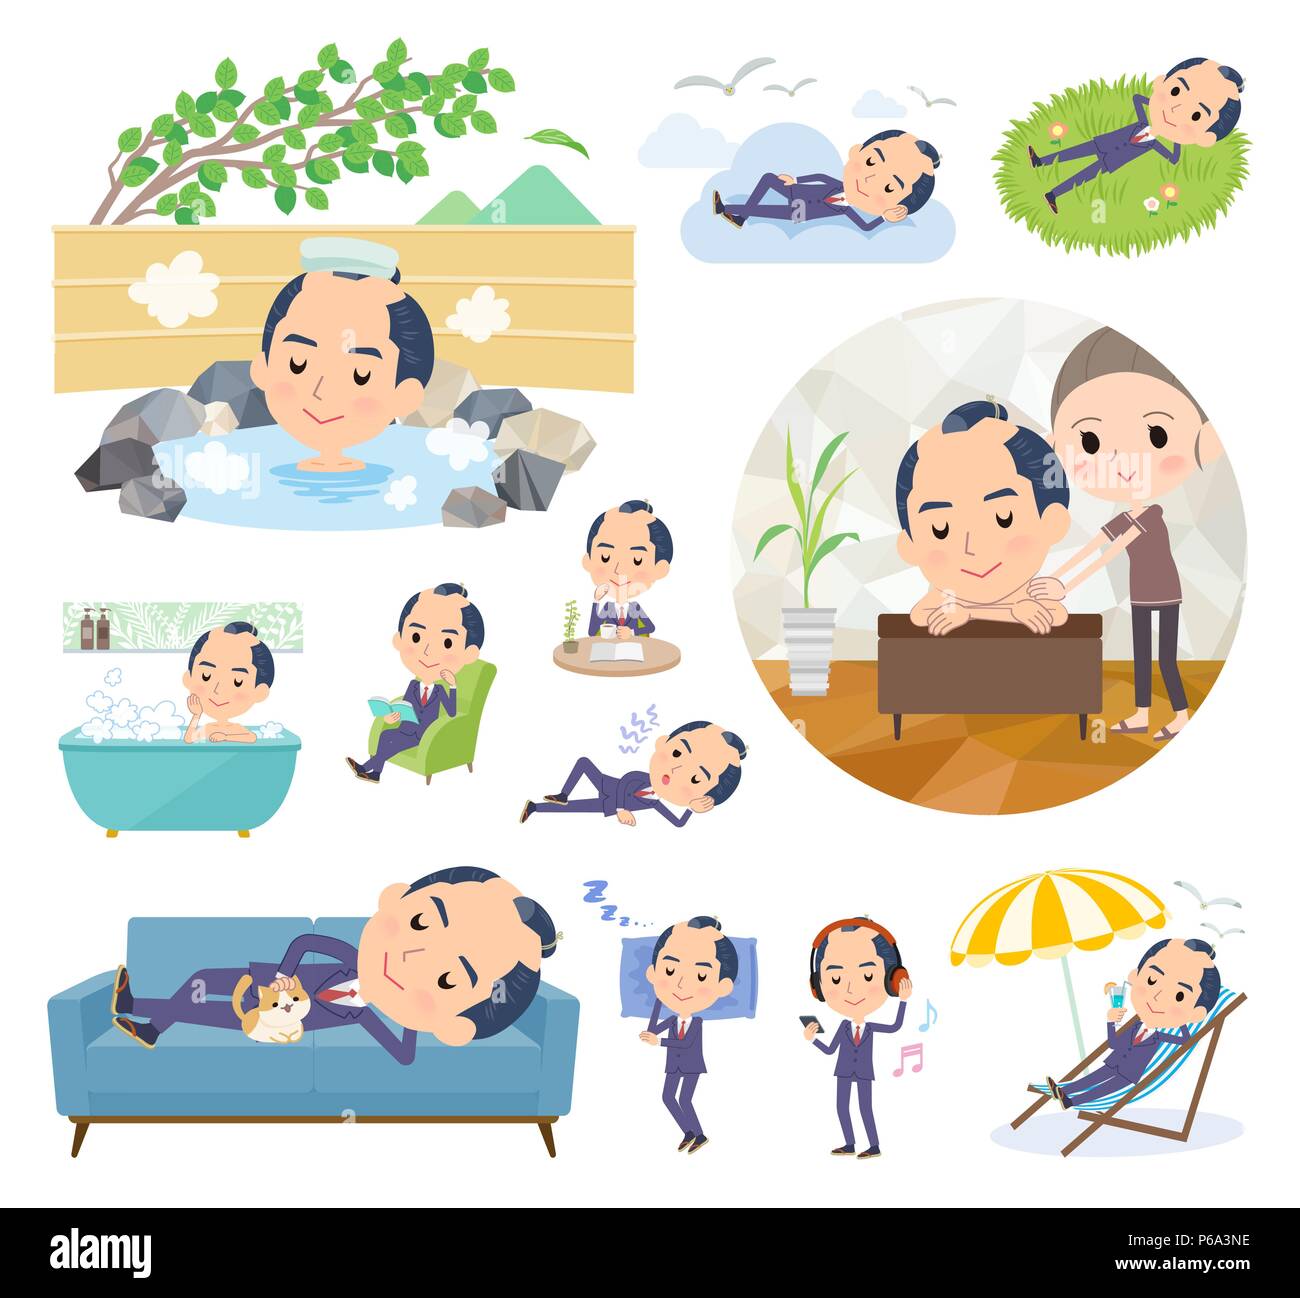 A set of businessman about relaxing.There are actions such as vacation and stress relief.It's vector art so it's easy to edit. Stock Vector